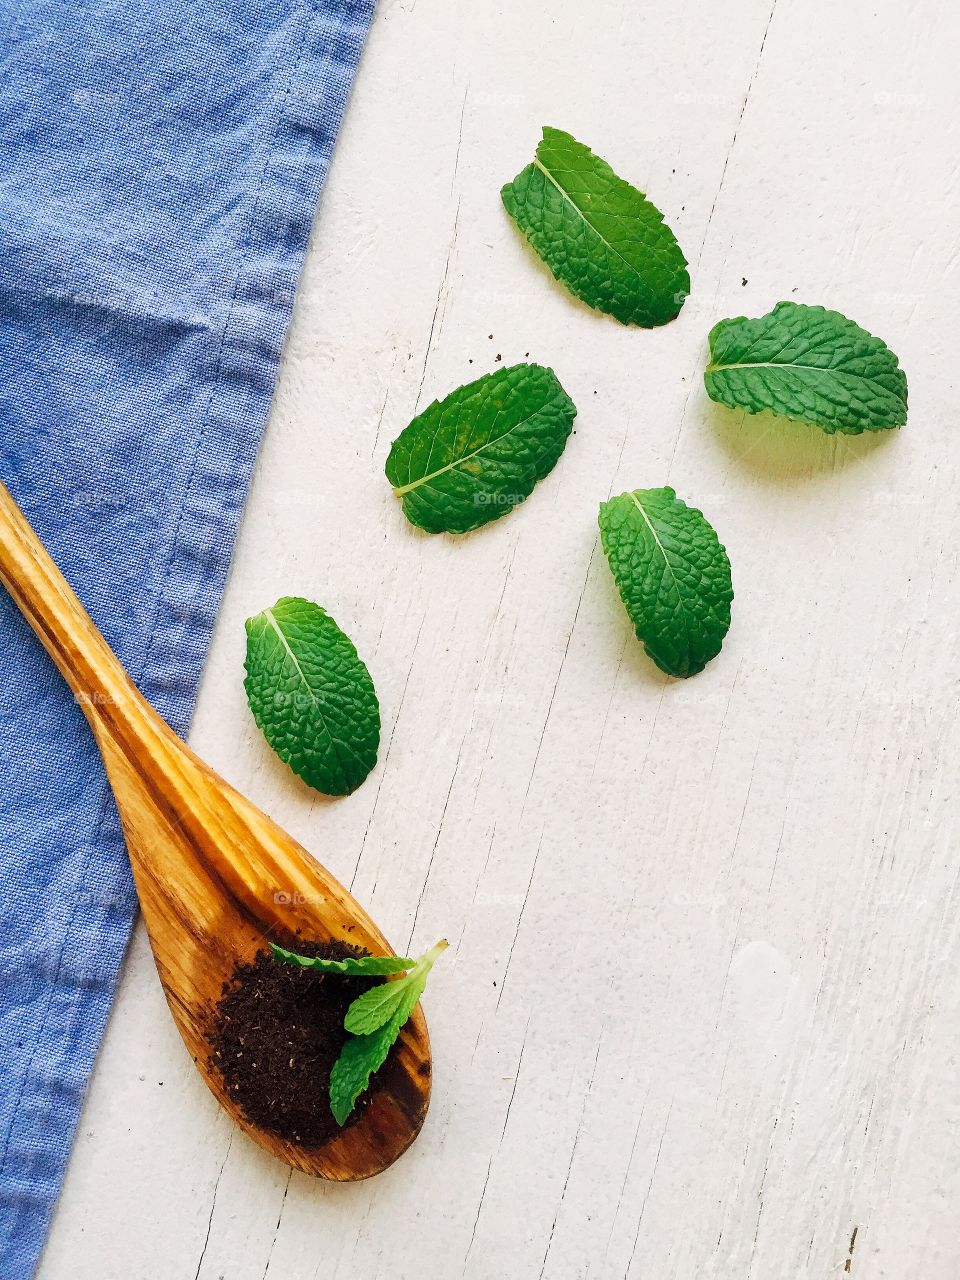 Dried tea leaves on wooden spoon with mint leaves